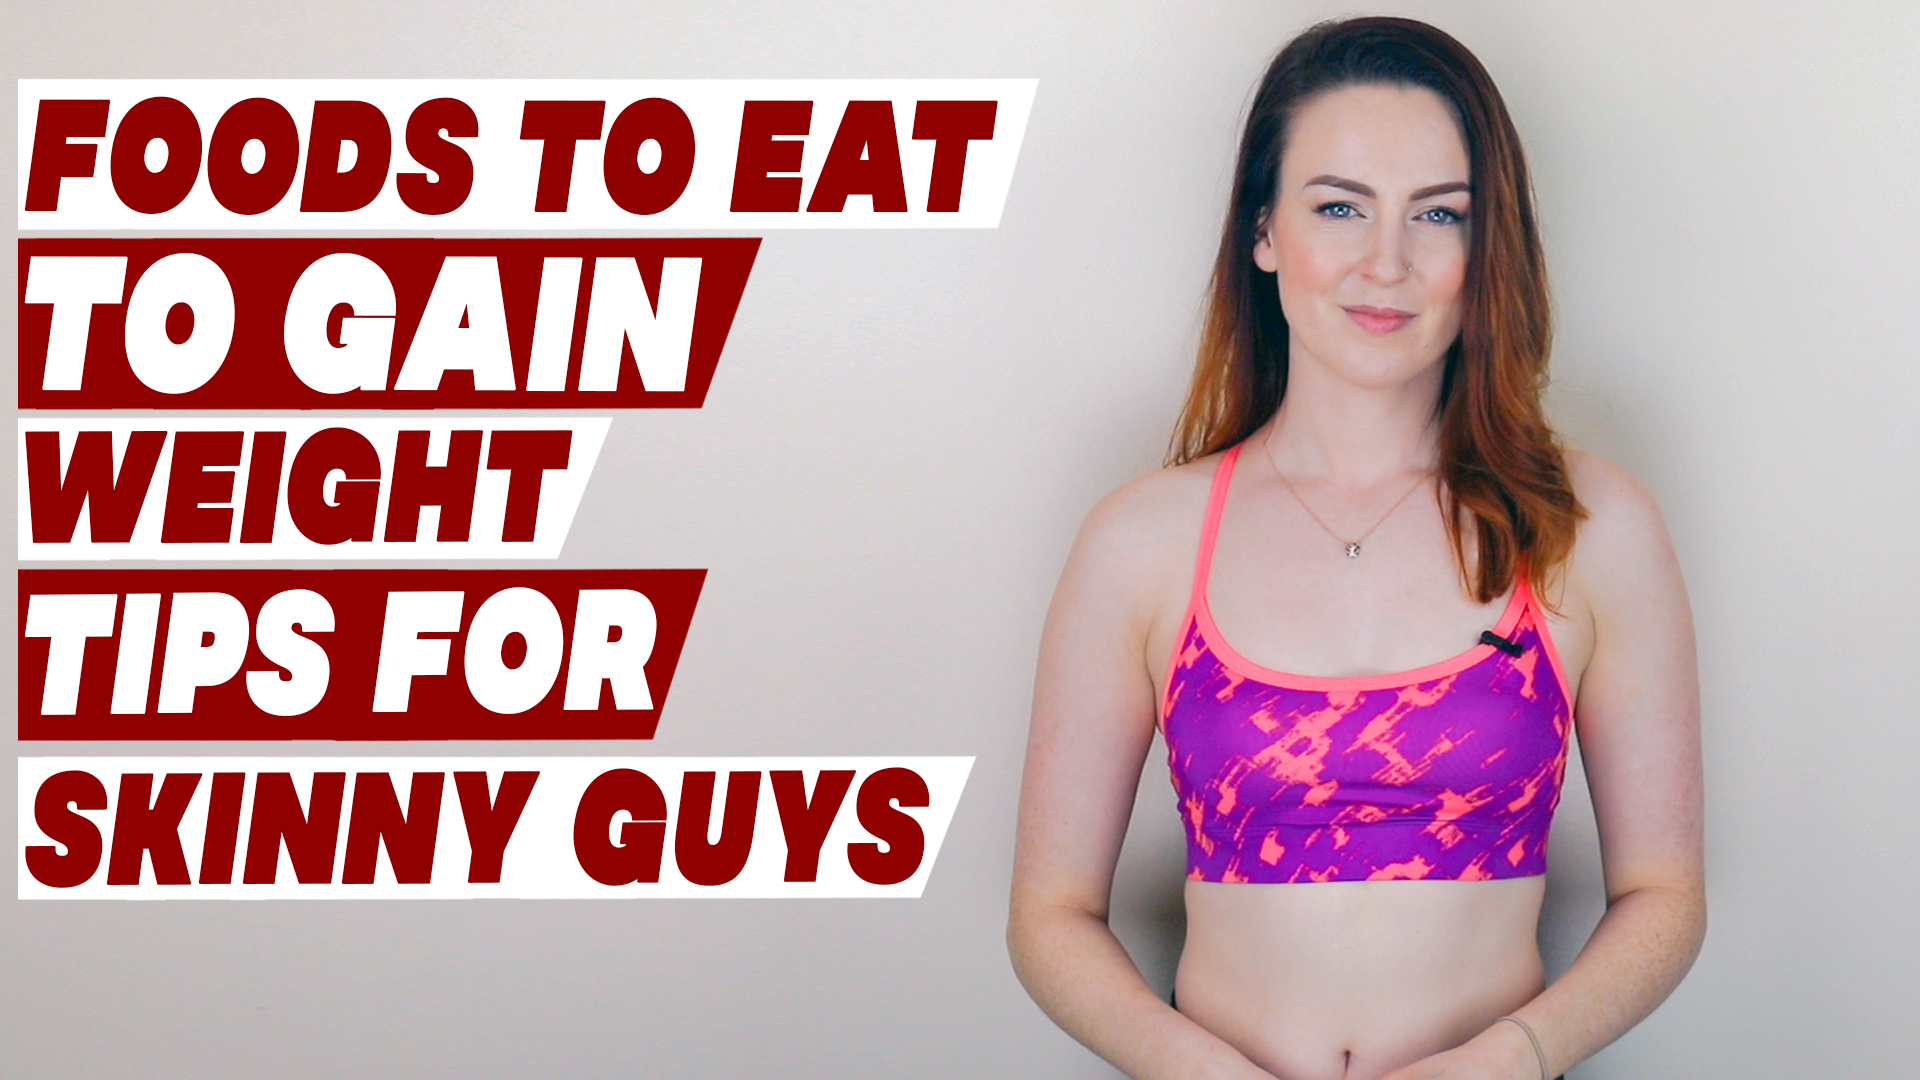 Foods to eat to gain weight (Tips for skinny guys)